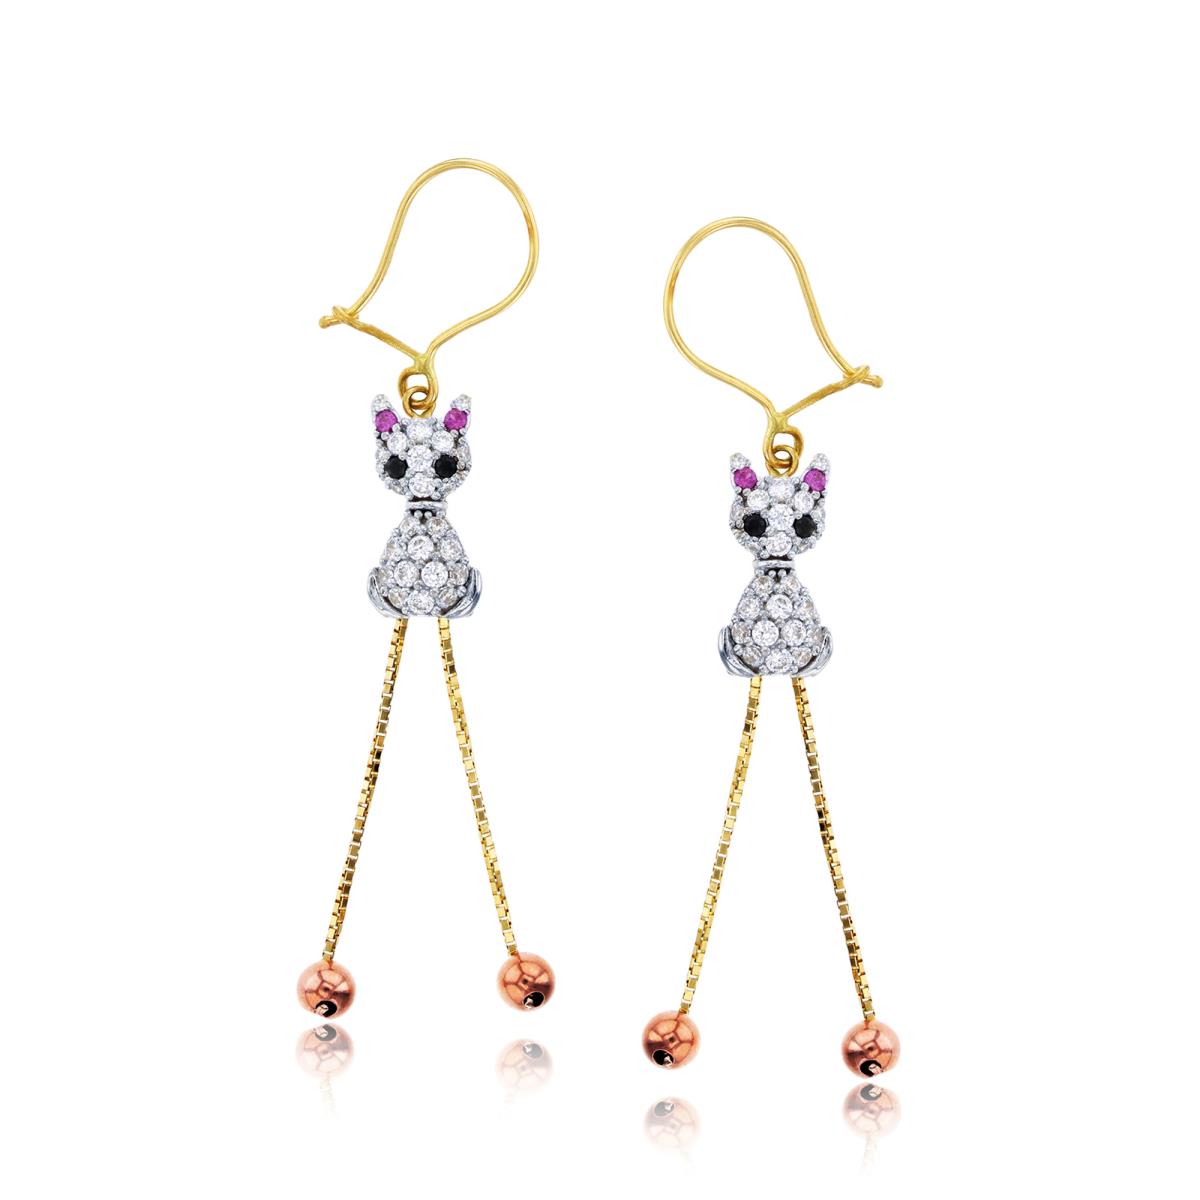 14K Tri-color Gold Dangling Cat Earring with Cubic Zirconia